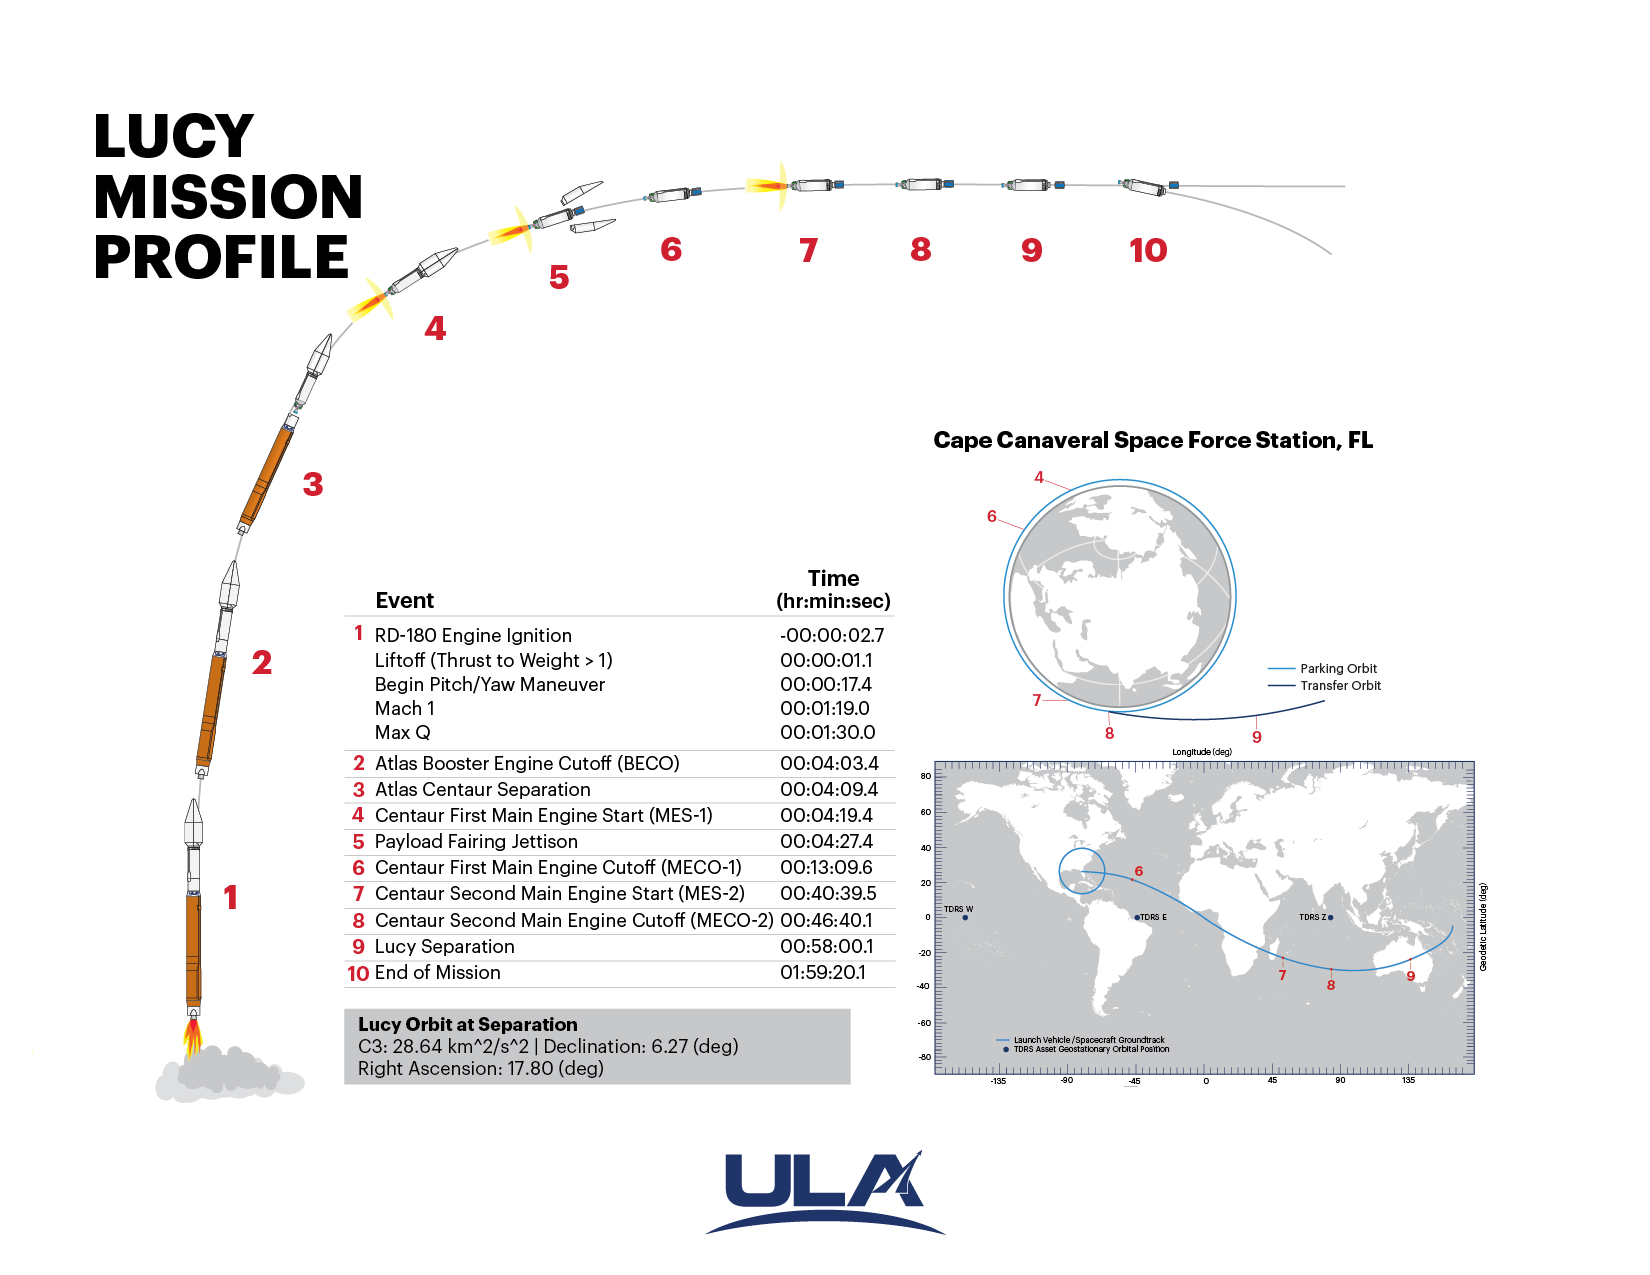 Illustration by United Launch Alliance